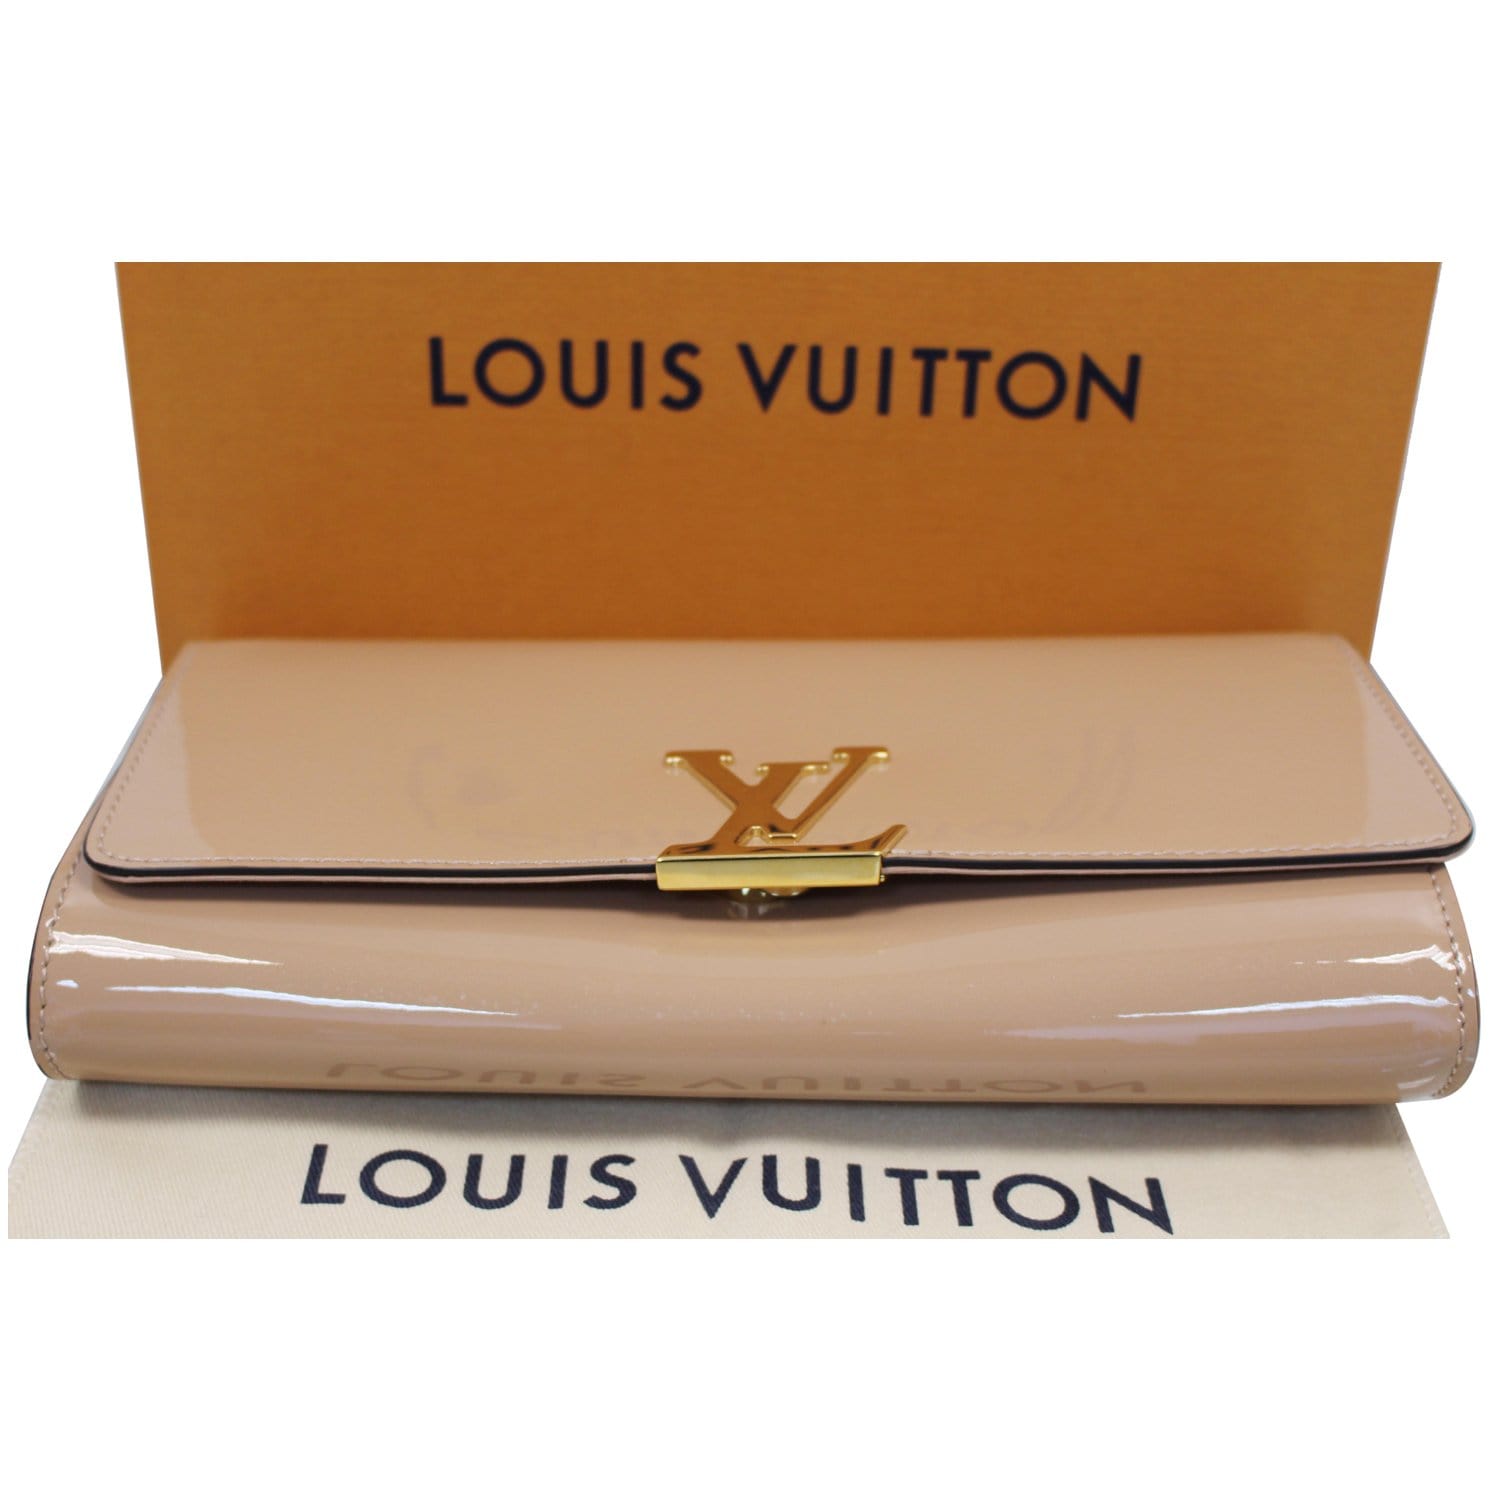 LOUIS VUITTON PATENT LEATHER WALLET WITH BOX